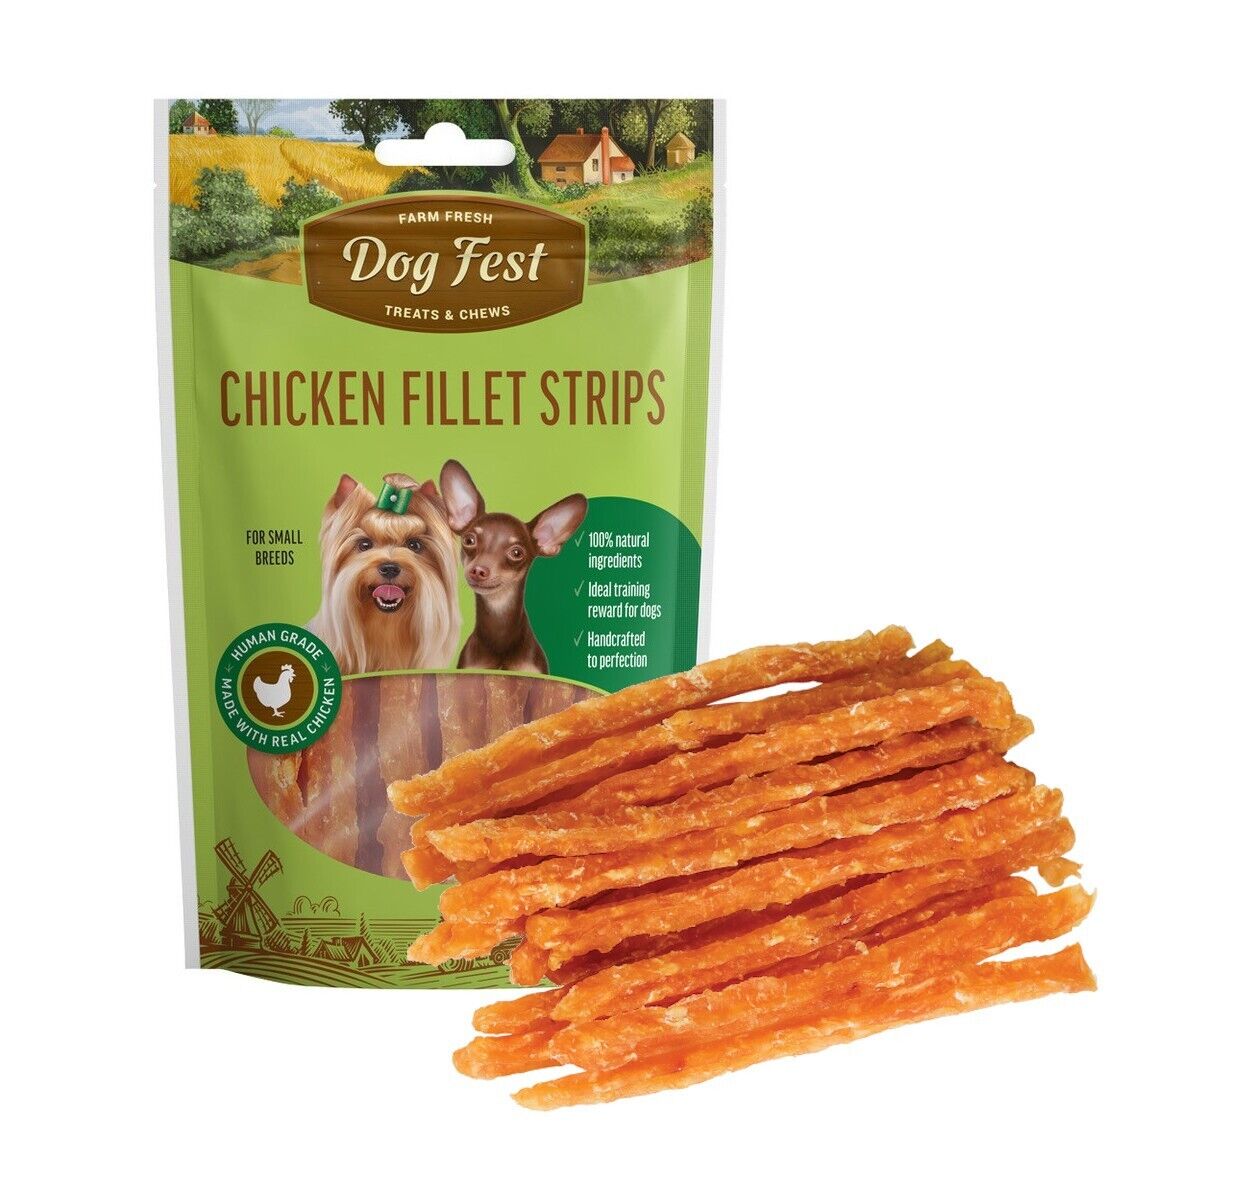 CHICKEN FILLET STRIPS (Pack of 2) - Small Breed - Jerky Dog Treats from Dog Fest Dog Fest Fillet strips